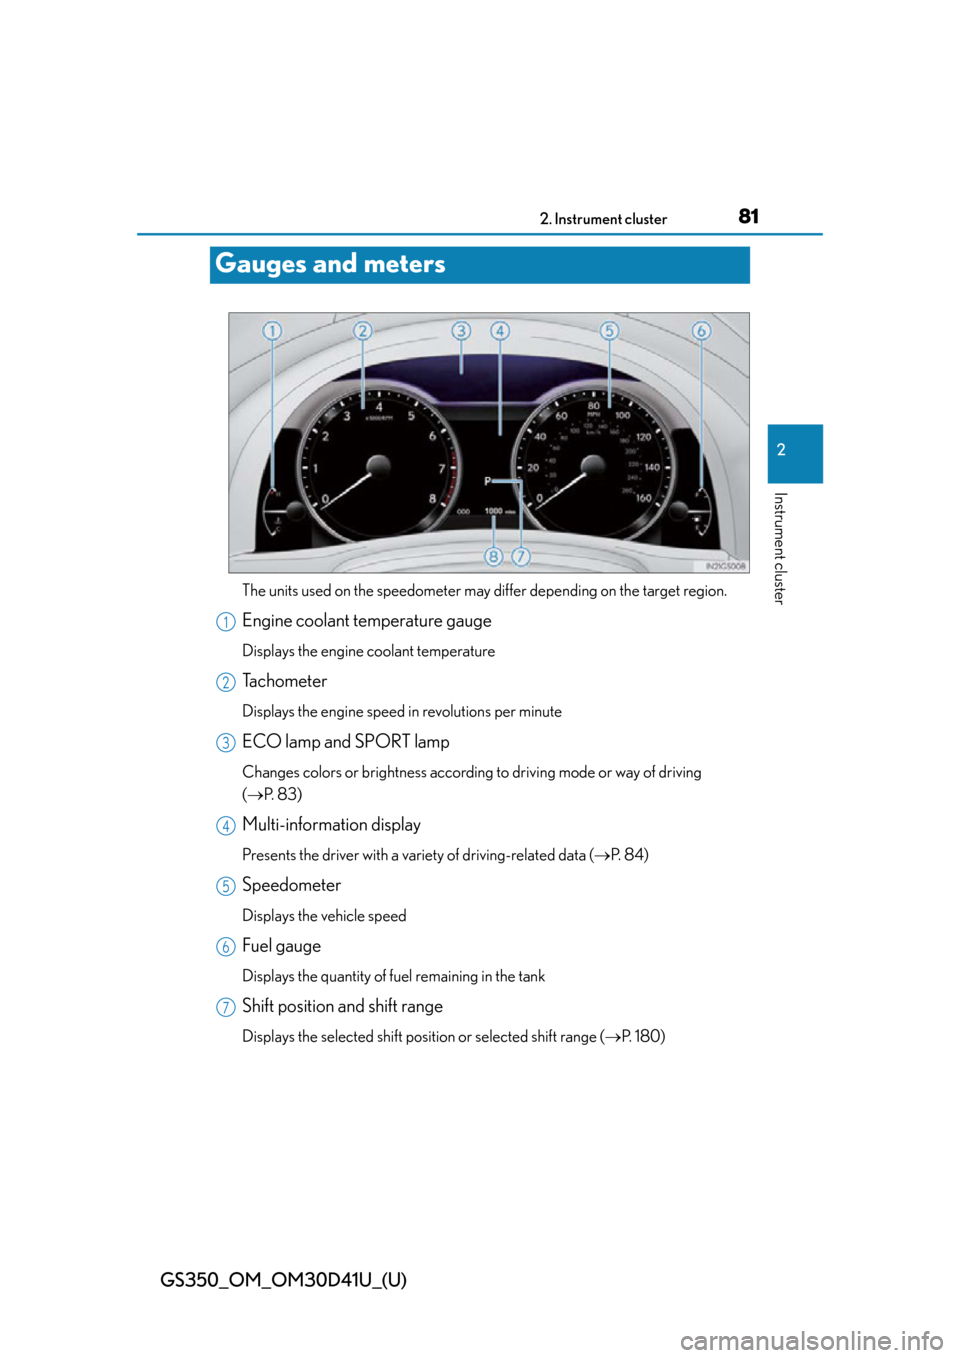 Lexus GS350 2014  Do-it-yourself maintenance / LEXUS 2014 GS350 OWNERS MANUAL (OM30D41U) 81
GS350_OM_OM30D41U_(U)2. Instrument cluster
2
Instrument cluster
Gauges and meters
The units used on the speedometer may di ffer depending on the target region.
Engine coolant temperature gauge
Disp